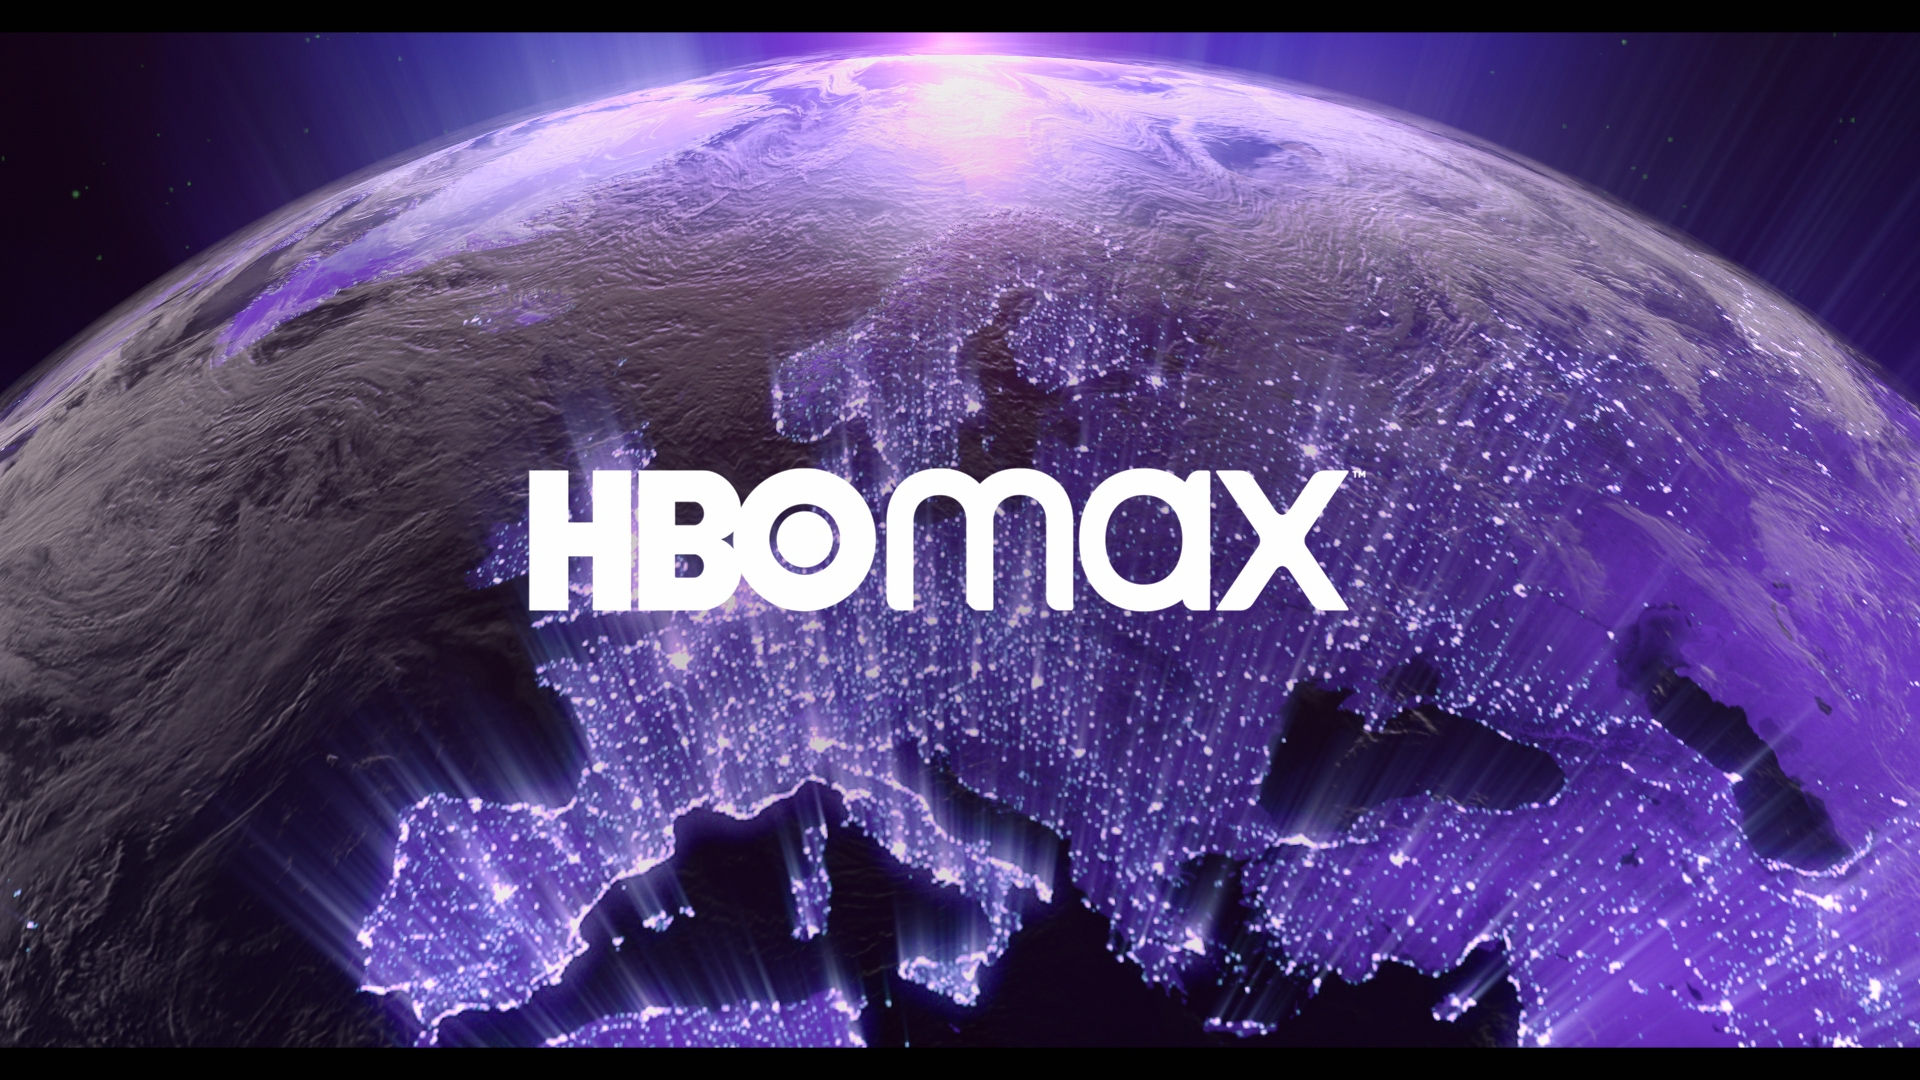 HBO Max unveils its European offensive - Cineuropa